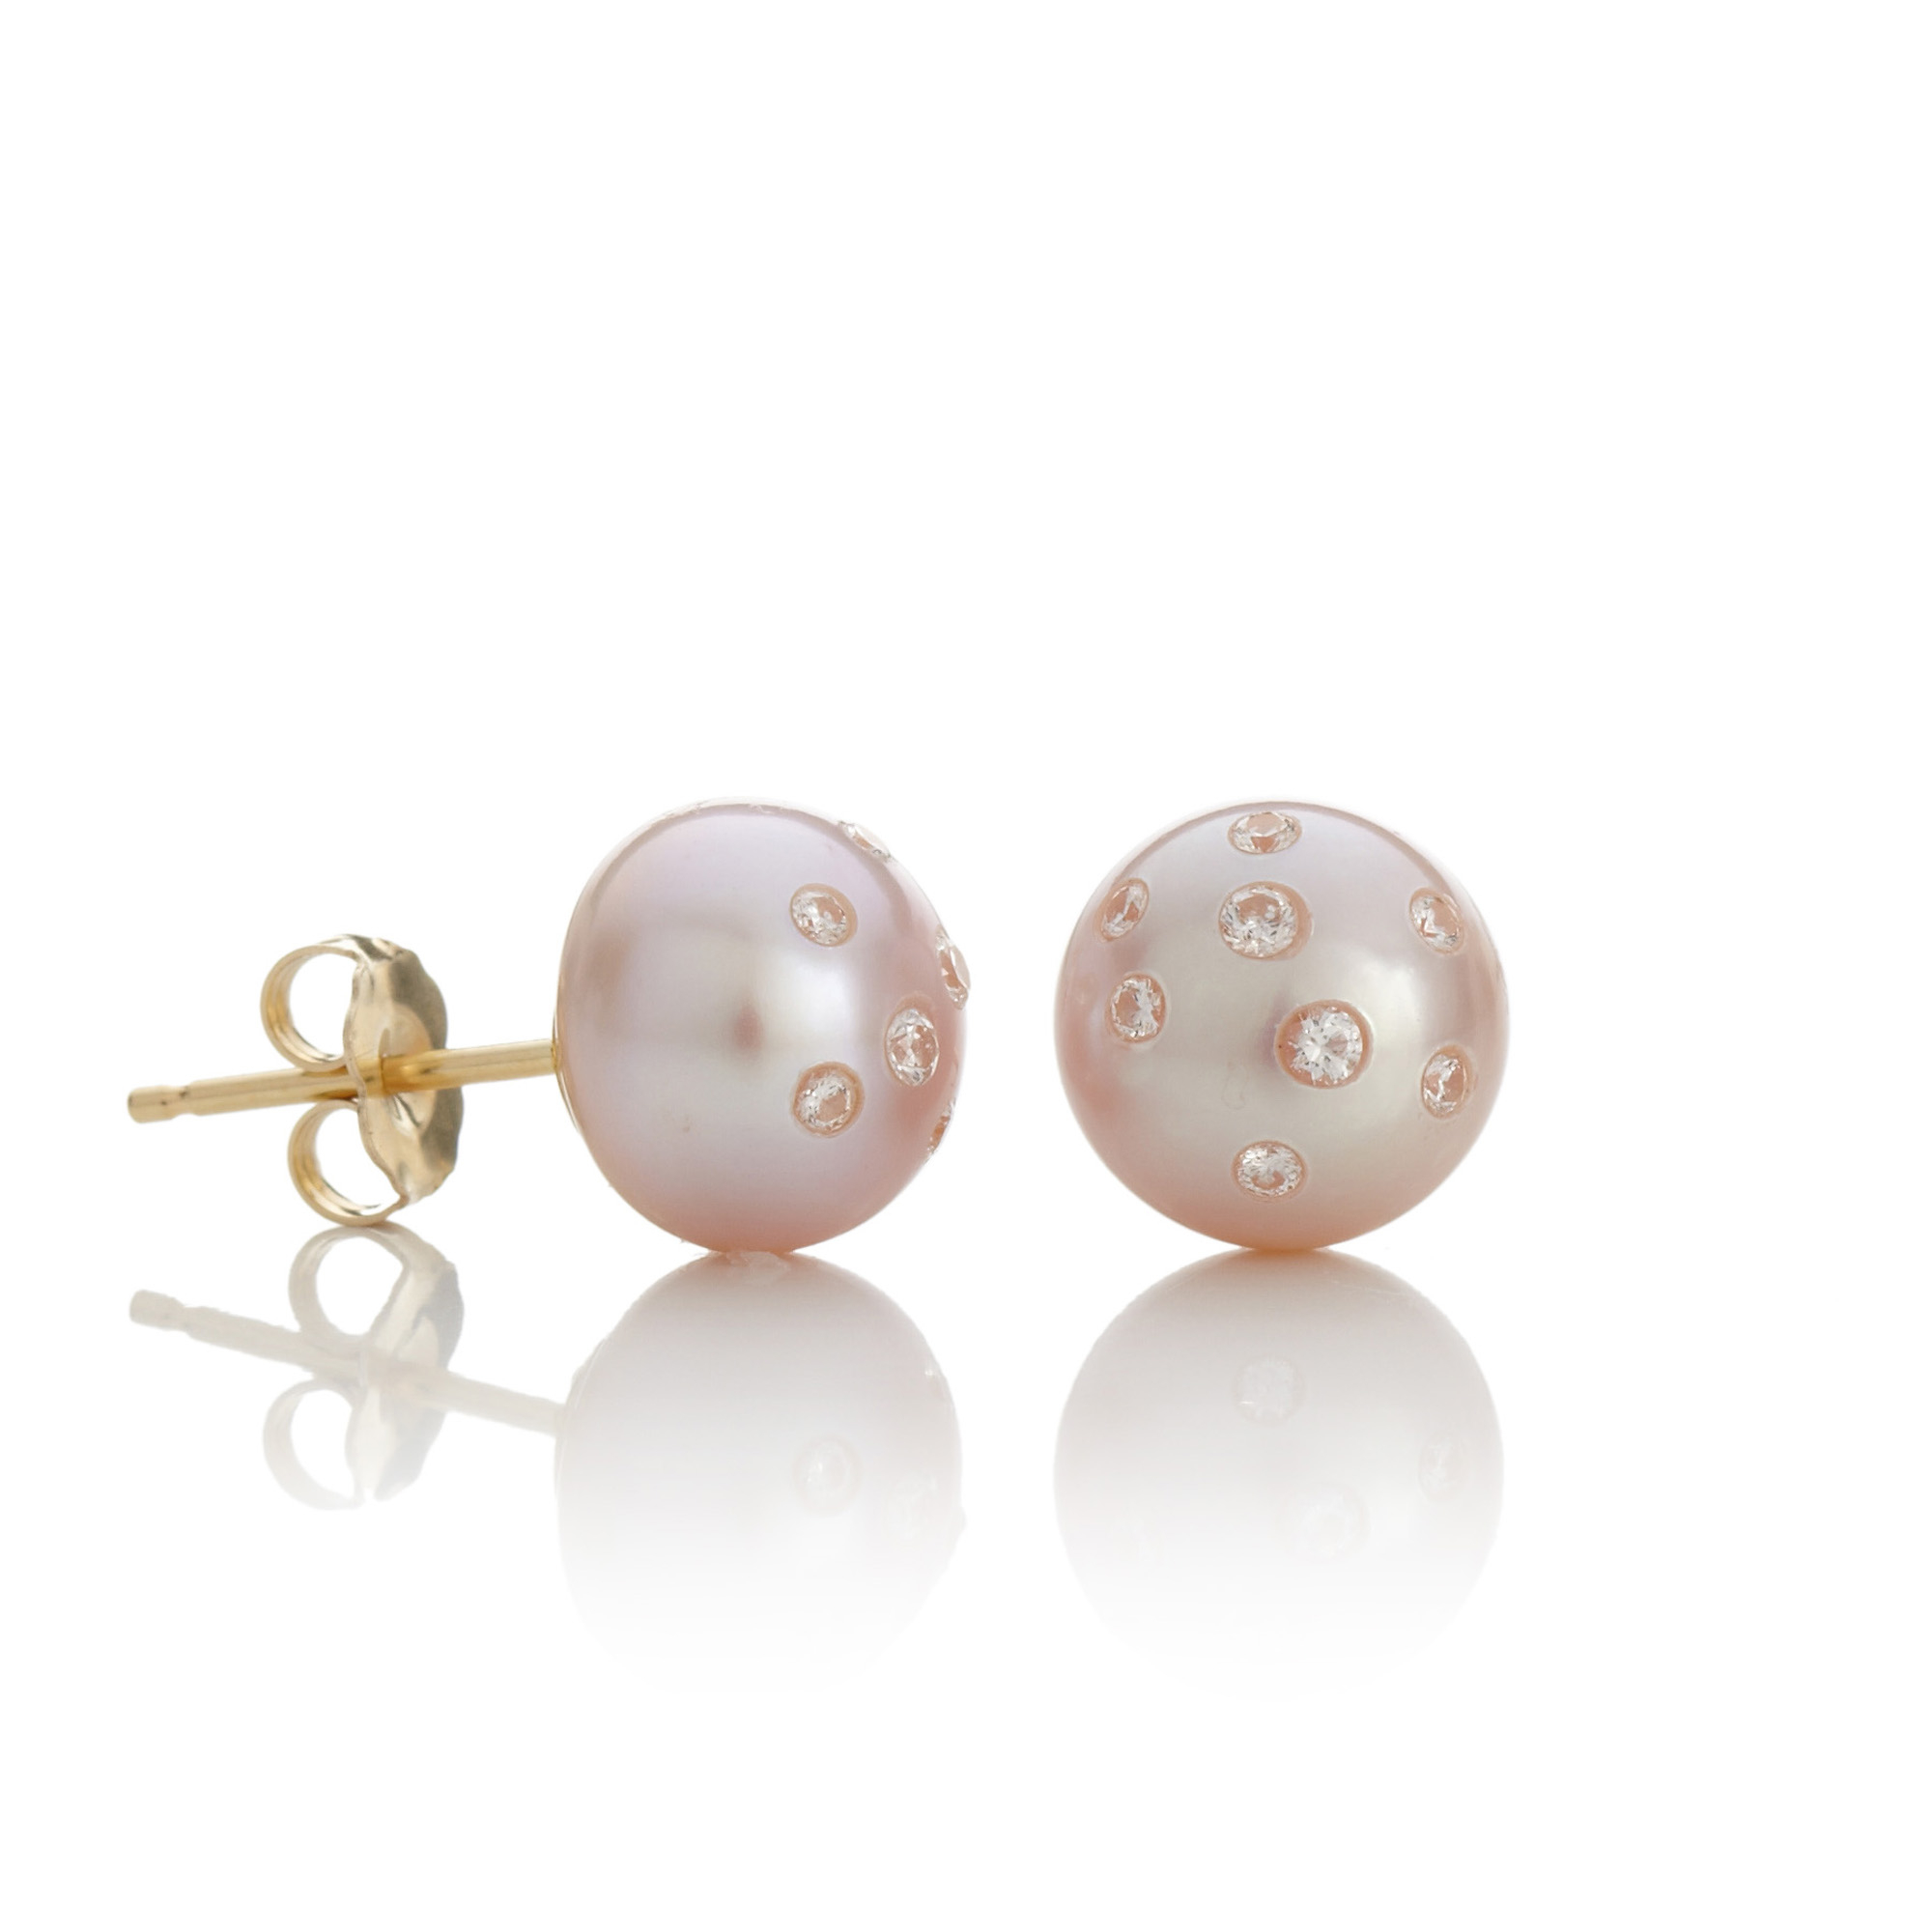 Russell Trusso Pink Coin Pearl Earrings, Small | Gump's